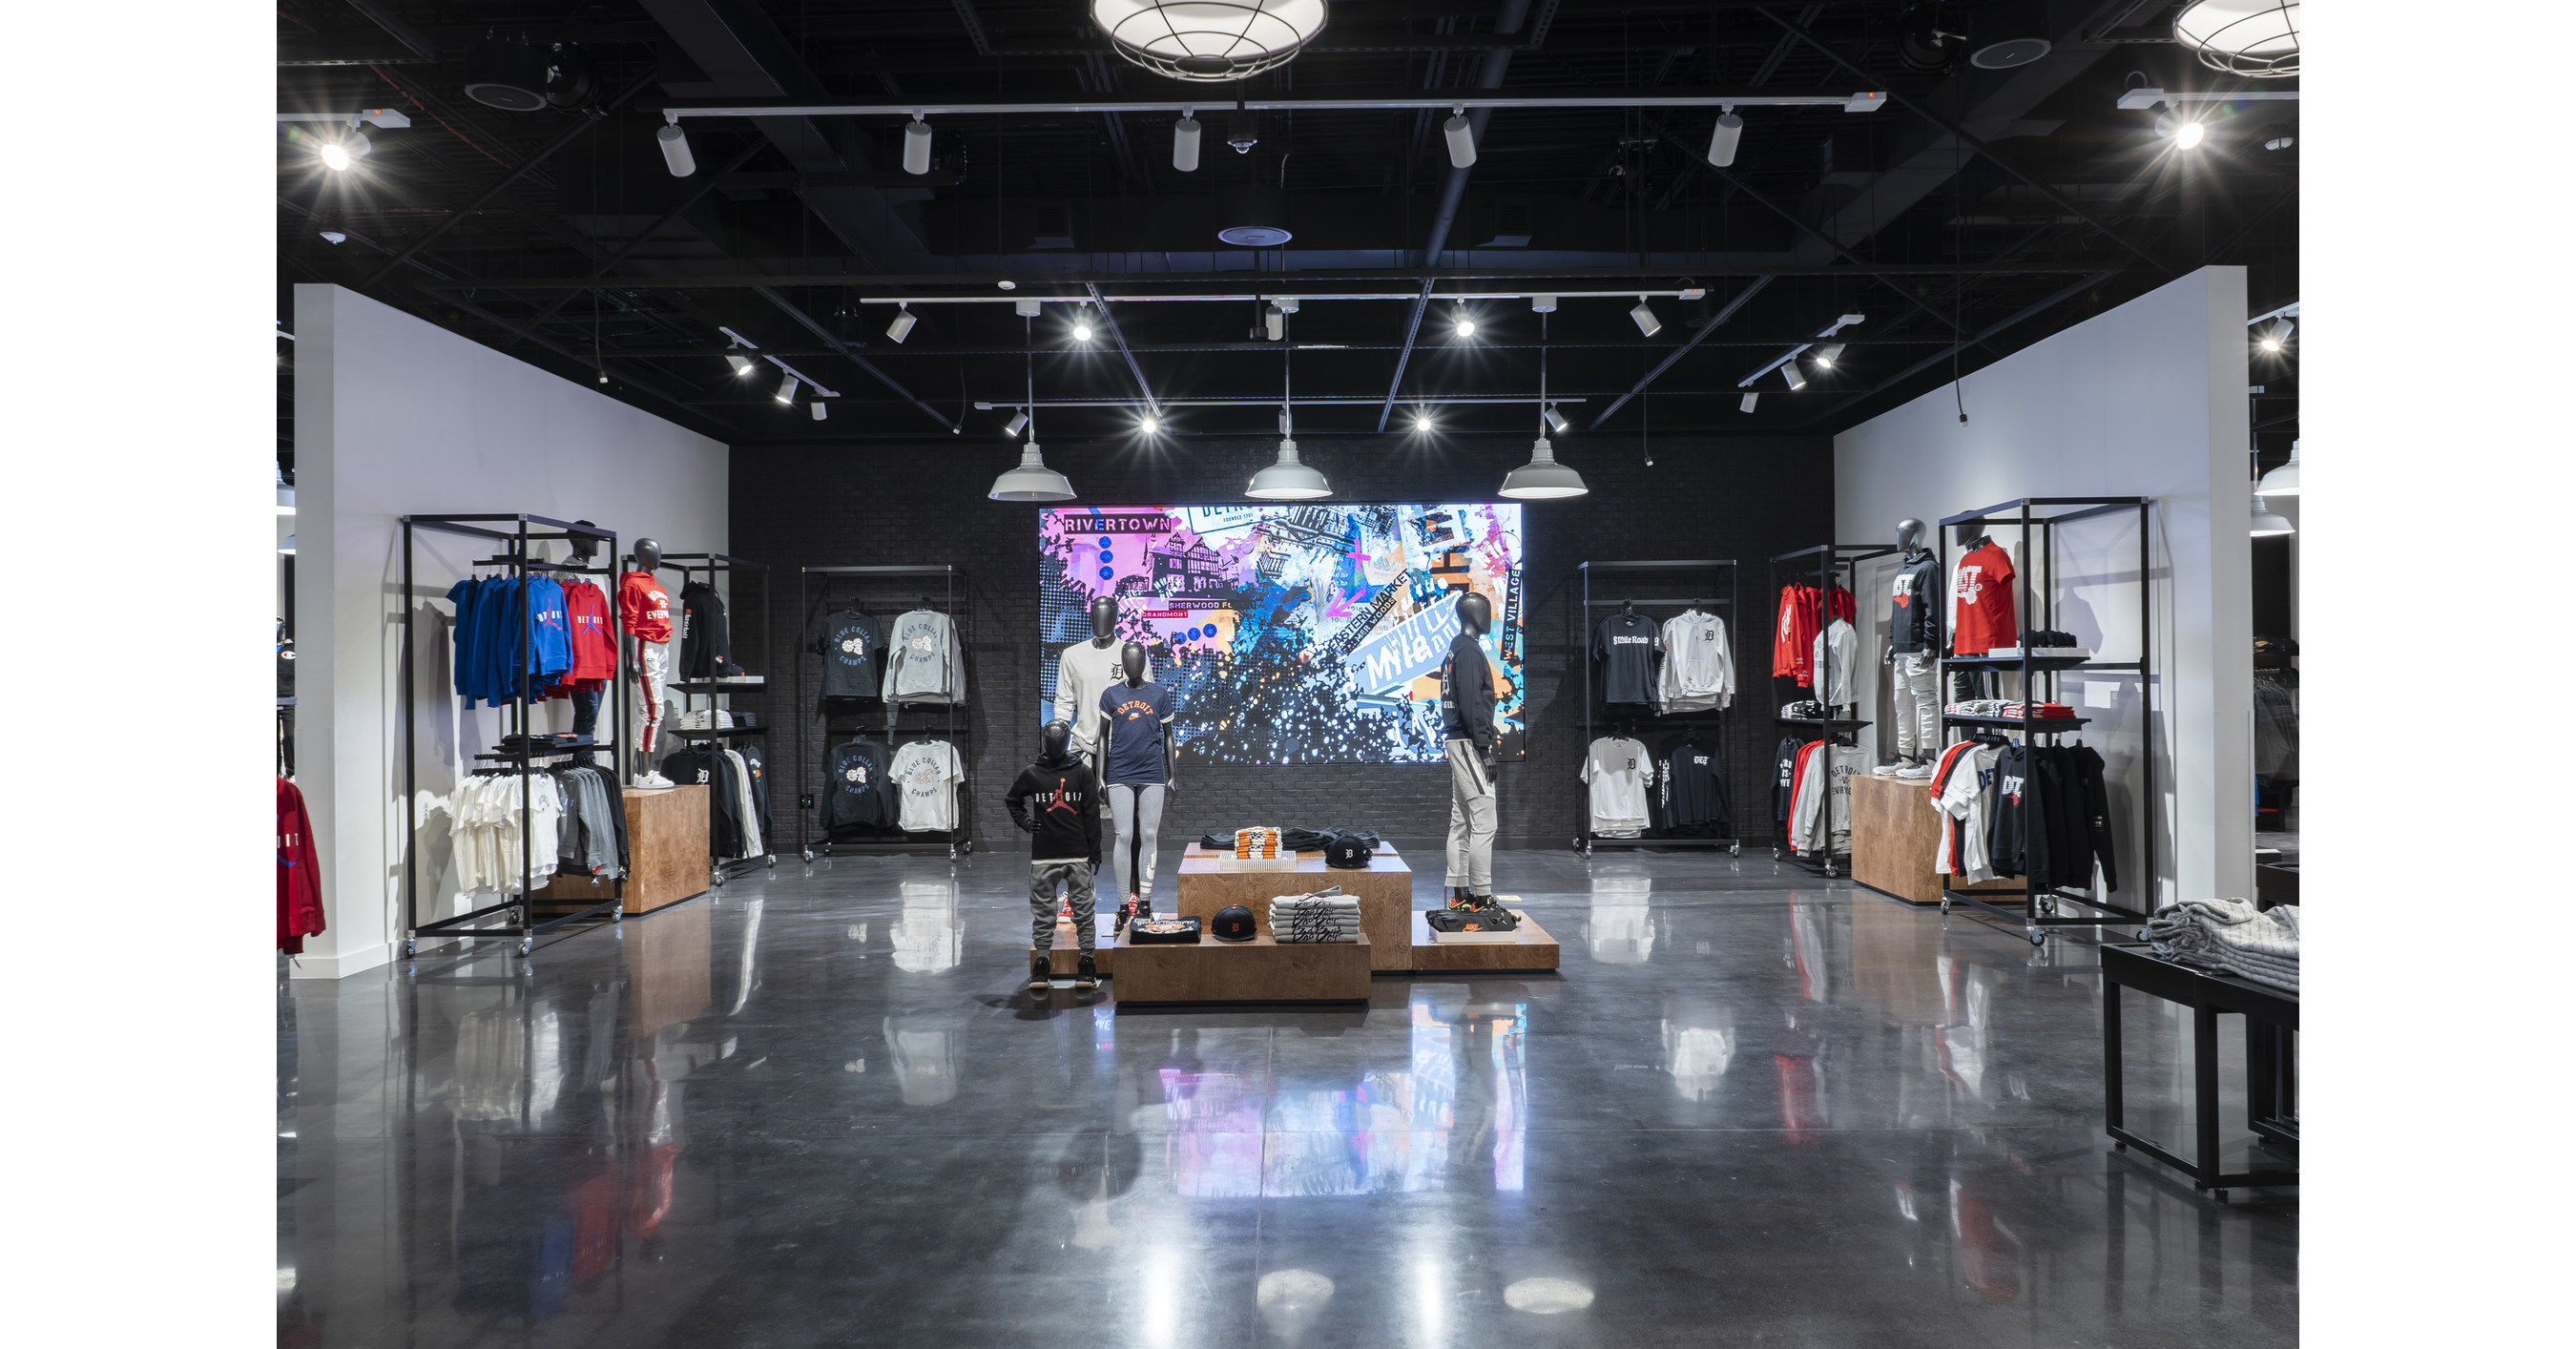 FOOT LOCKER OPENS REDESIGNED FLAGSHIP STORE